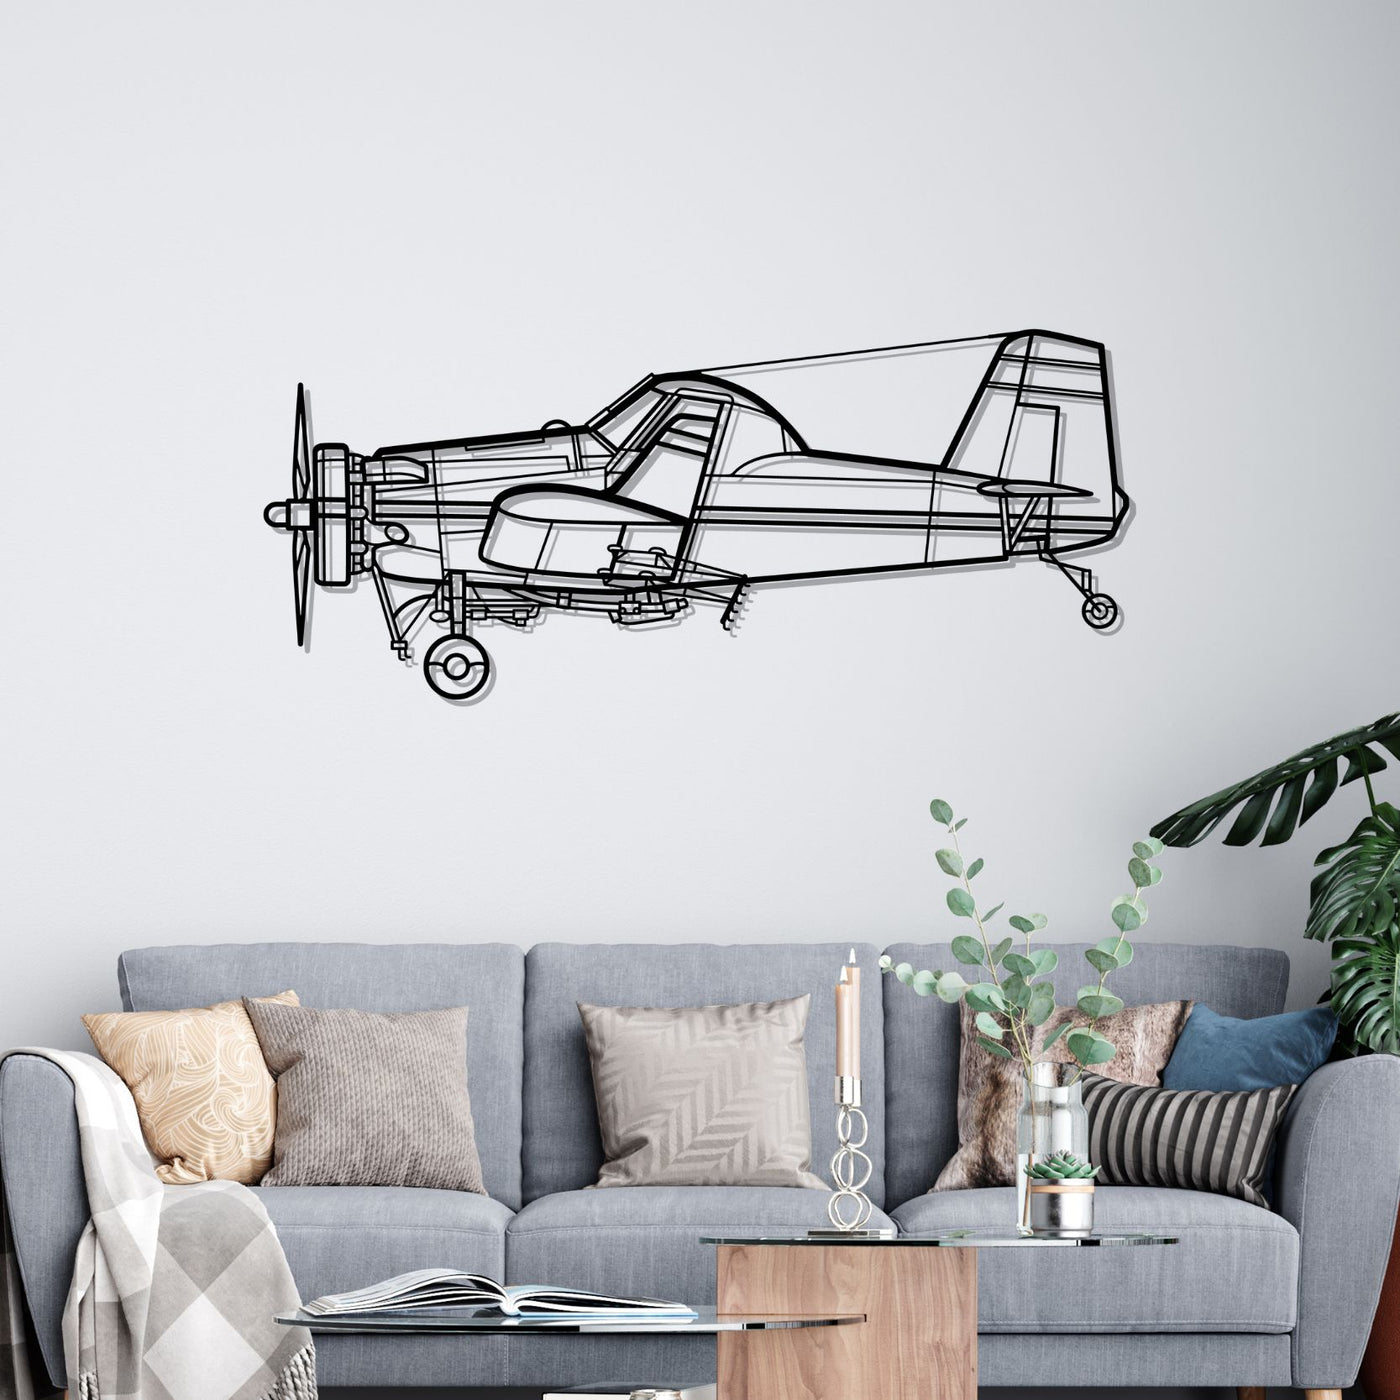 AT-301 Silhouette Metal Wall Art